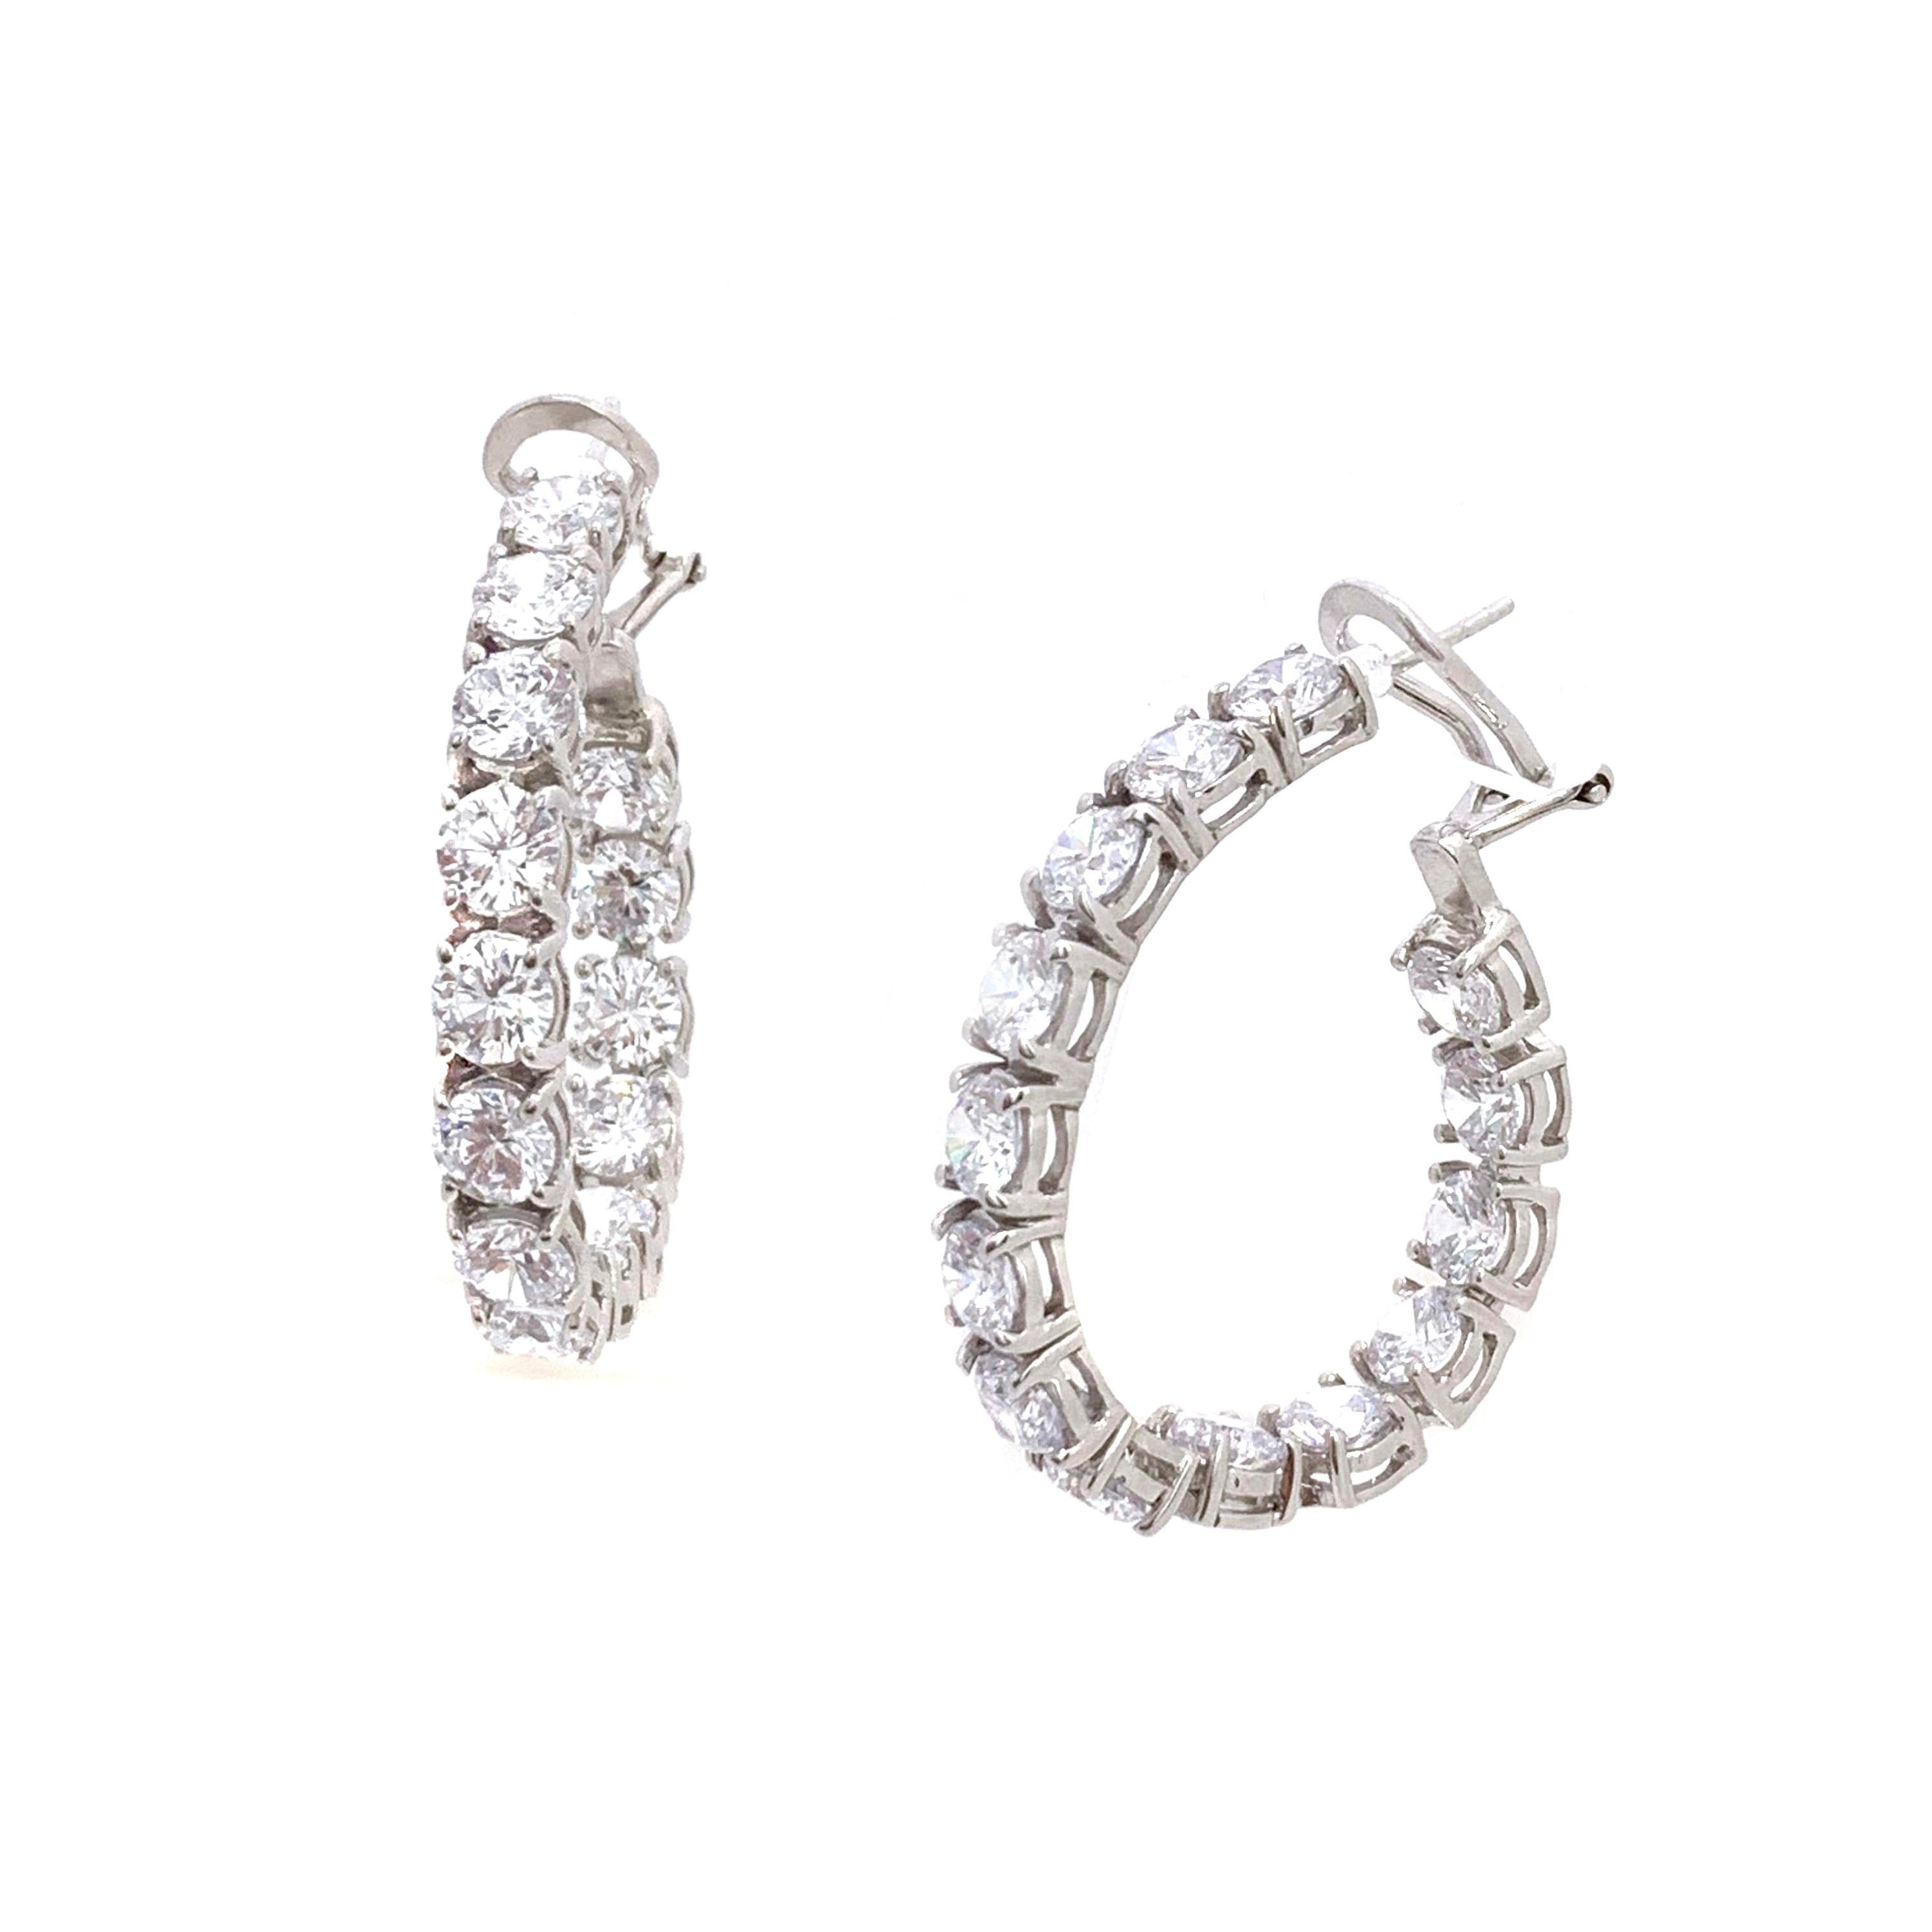 Stunning Faux Diamond Sterling Silver Hoop Earrings. Each stone is equal to a size of 0.5ct, all set facing forward, handset in platinum rhodium plated sterling silver. Straight post with omega clip back. 1.5